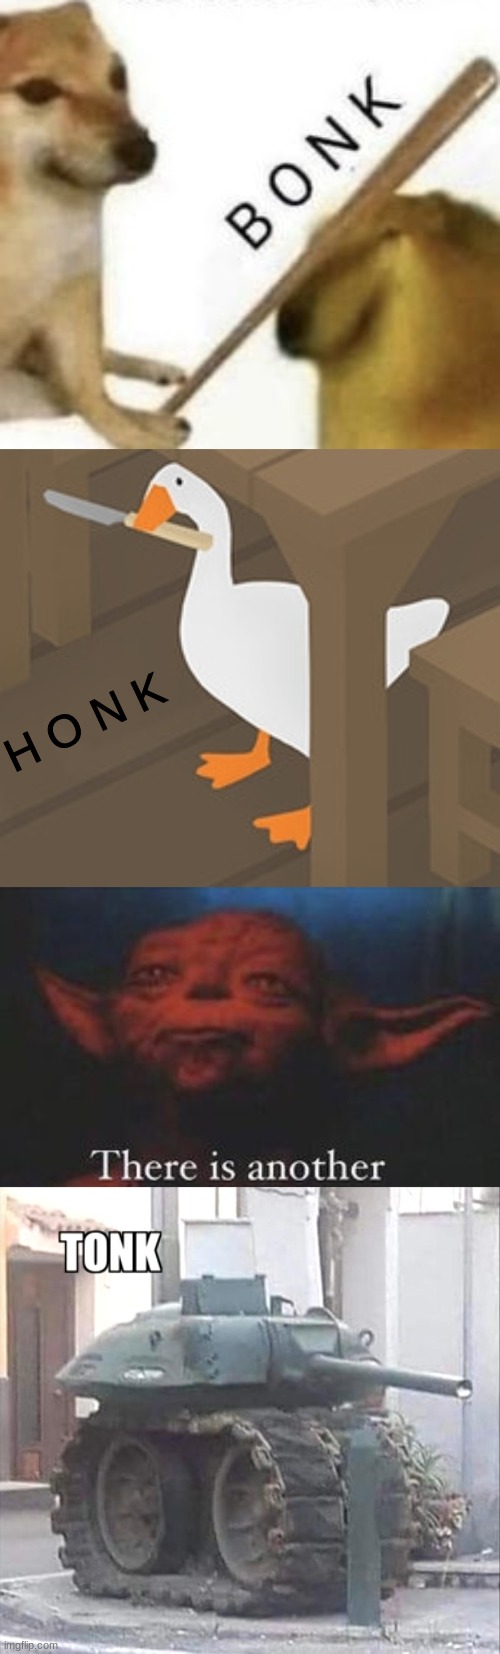 You've heard of | H O N K | image tagged in bonk,peace was never an option,yoda there is another,tonk | made w/ Imgflip meme maker